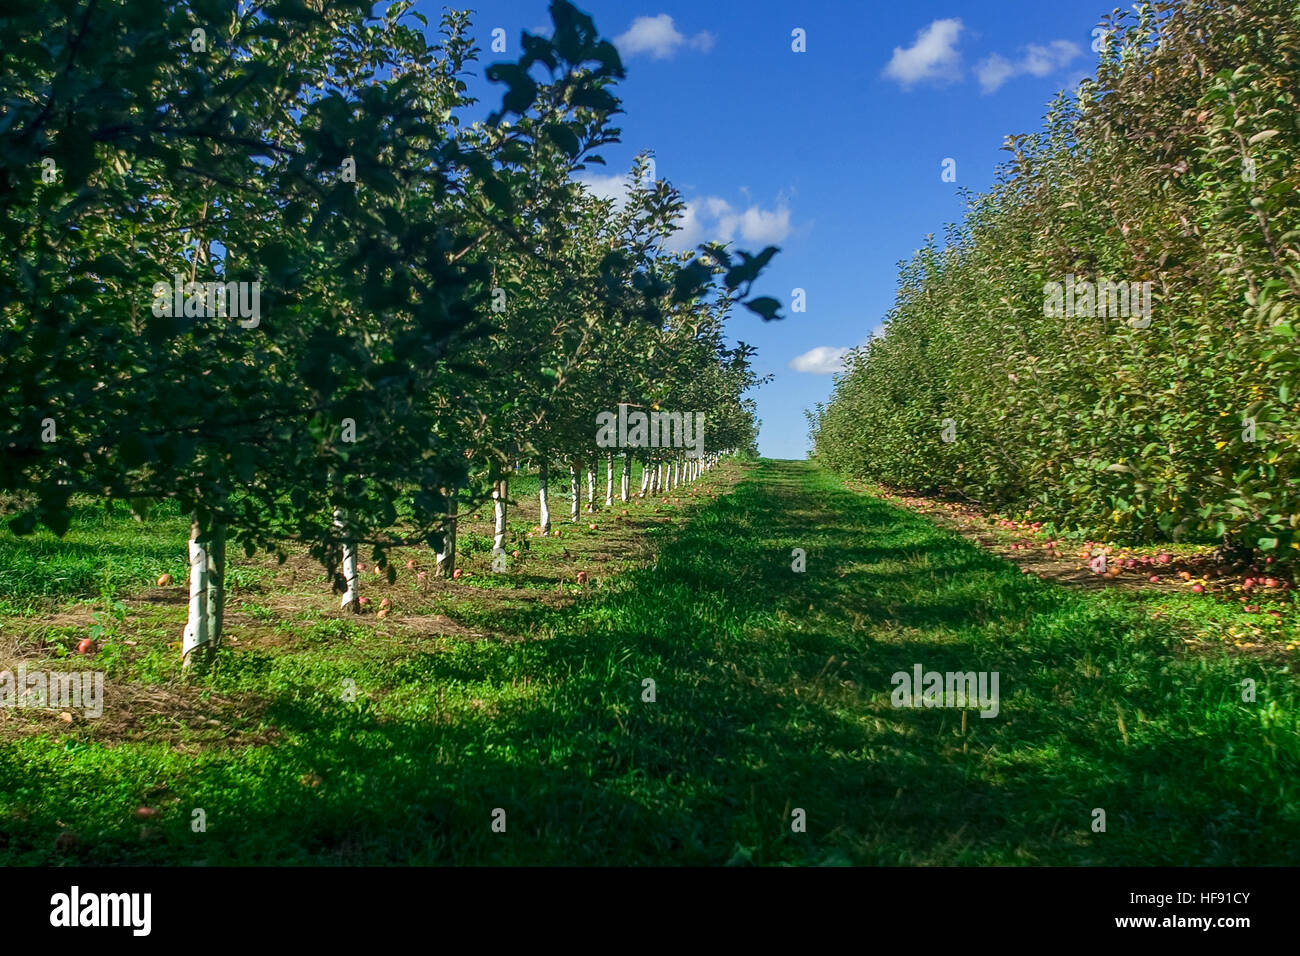 An apple orchard in Southwestern Ontario, Canada, with a wide selection of apple varieties. Stock Photo